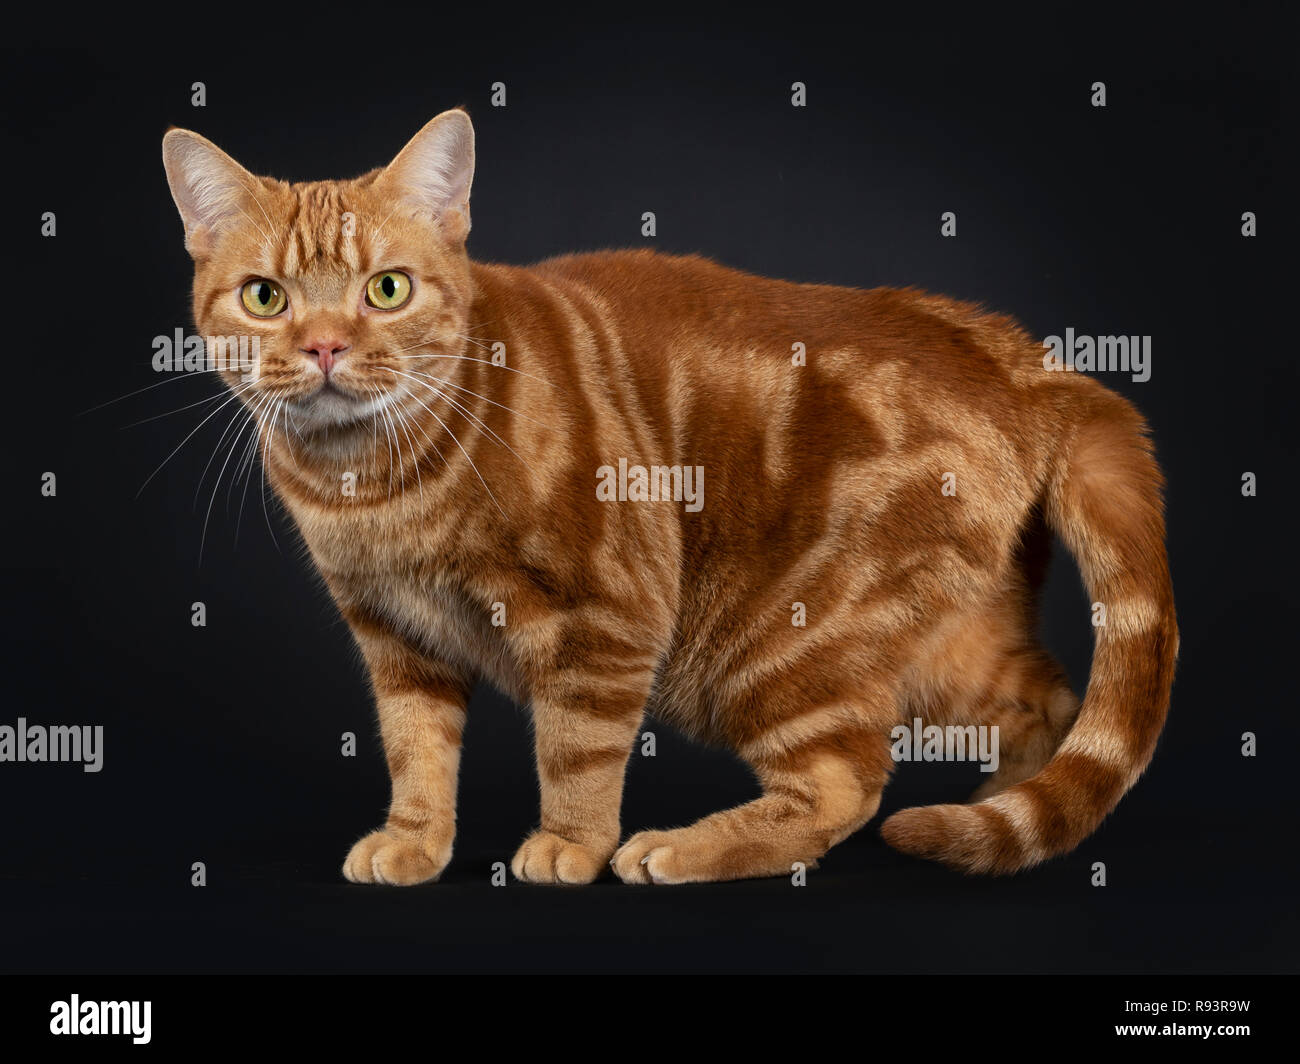 Adorable young adult red tabby American Shorthair cat, standing side ways. Looking at lens with yellow / green eyes. Isolated on a black background. Stock Photo